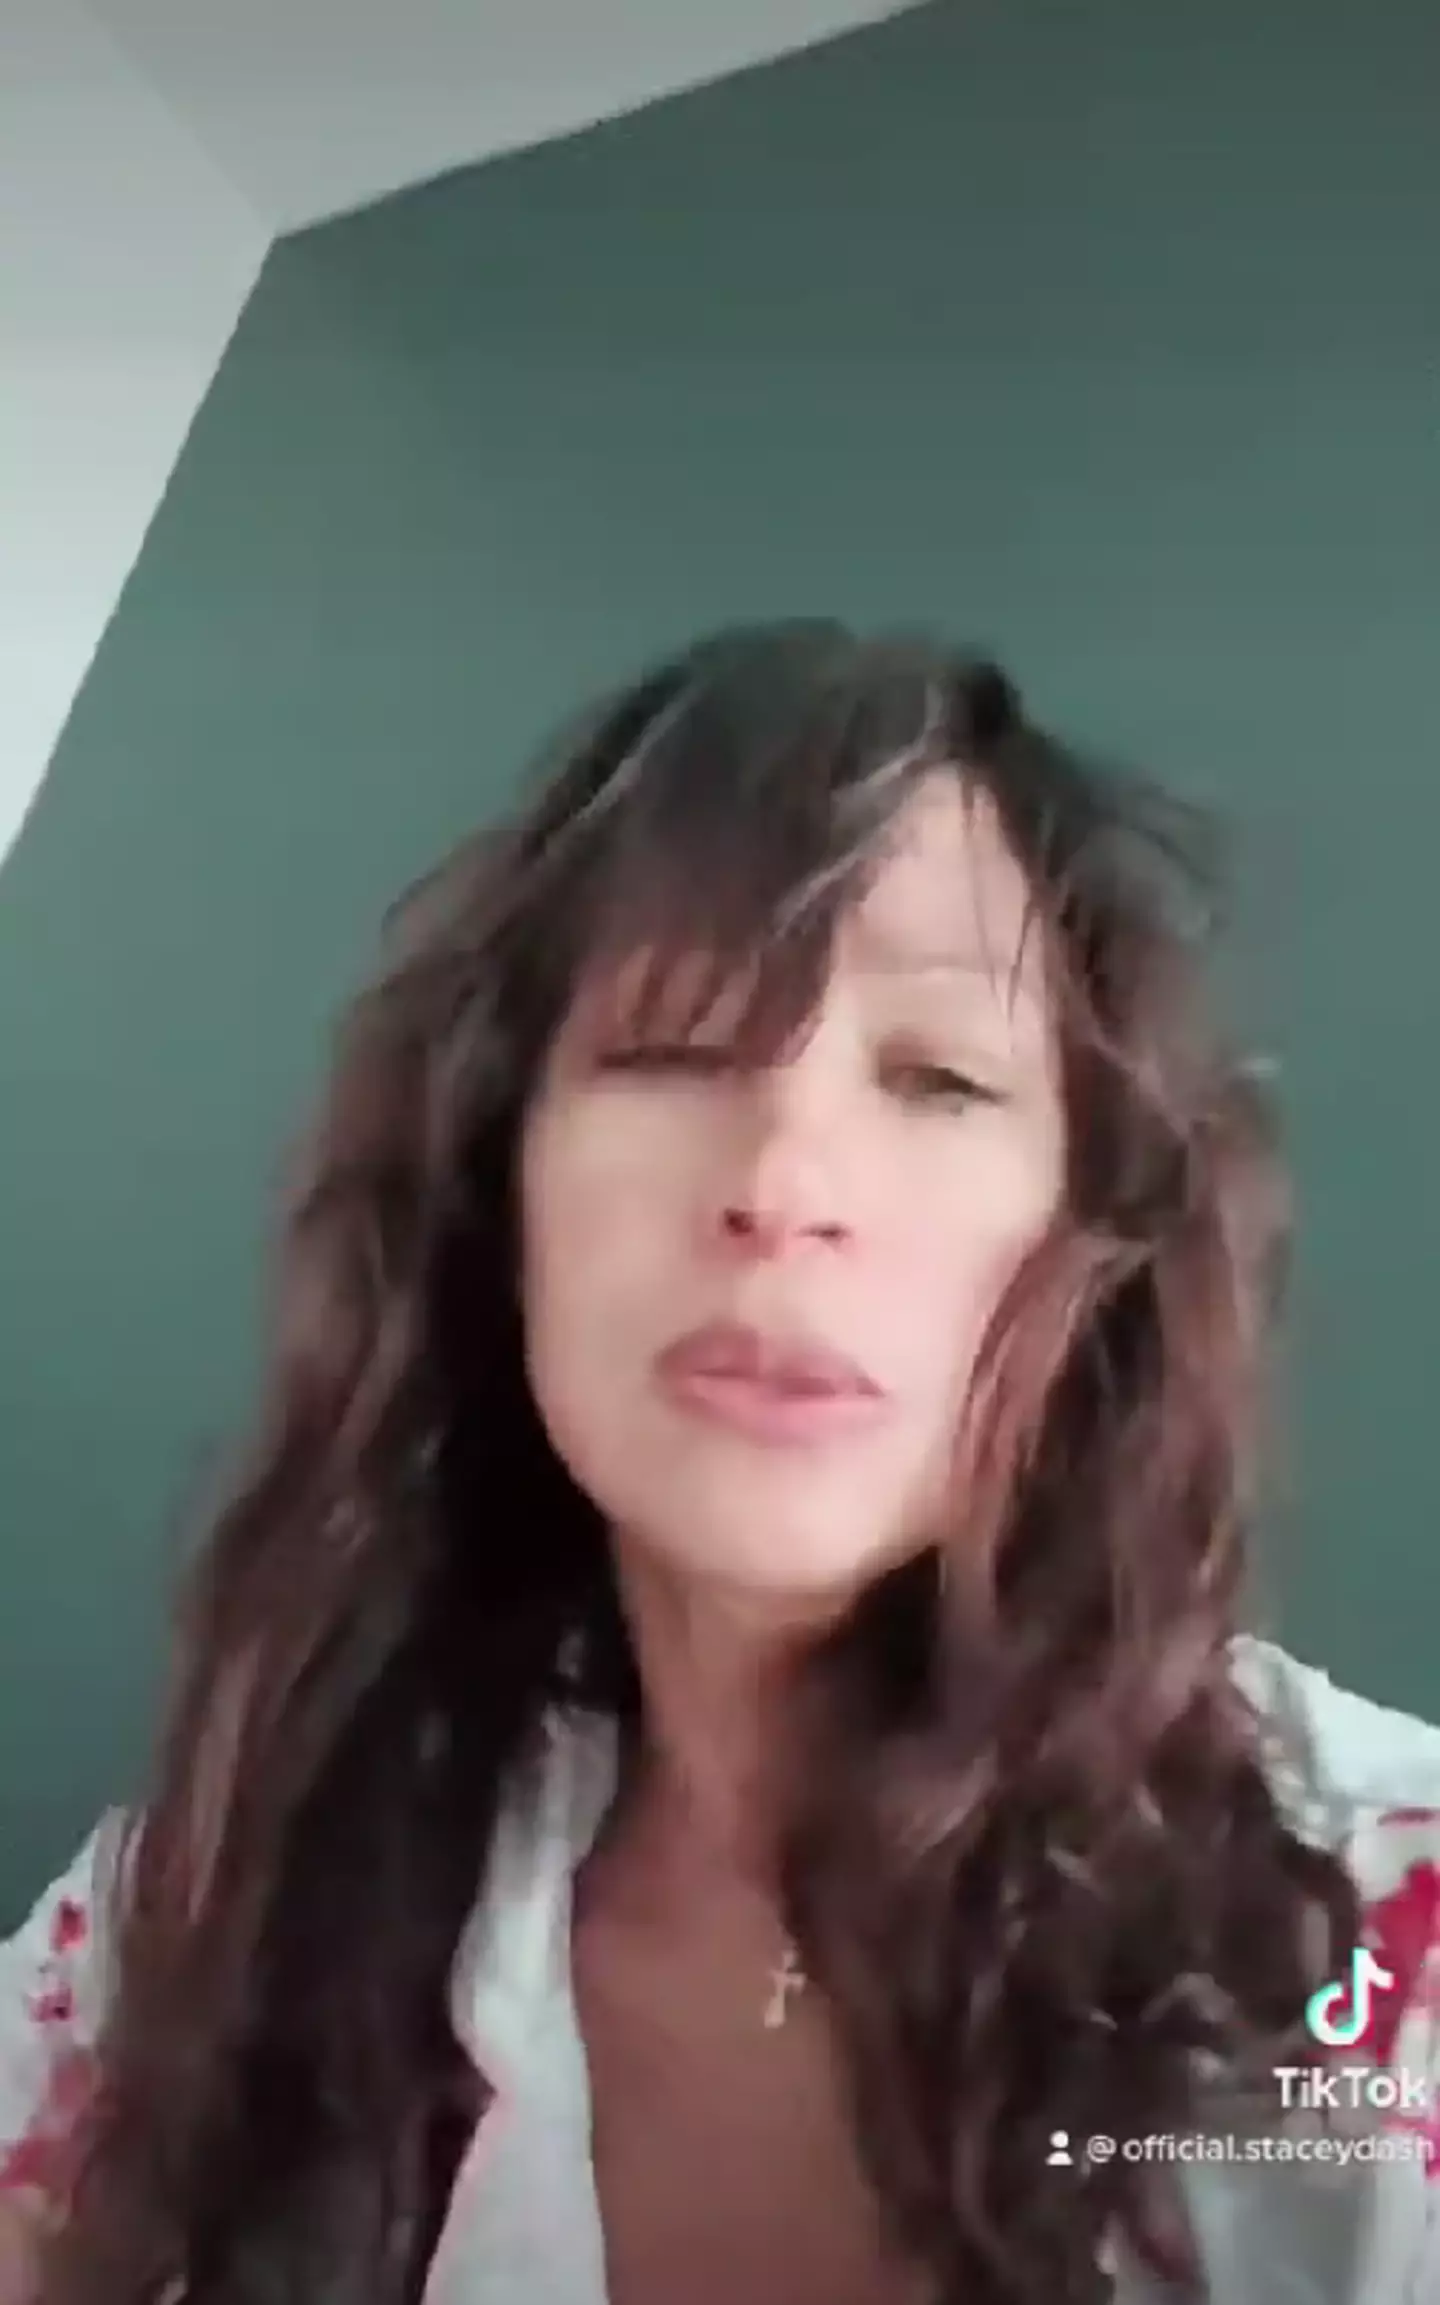 Stacey Dash uploaded the emotional video to her Instagram and TikTok page.